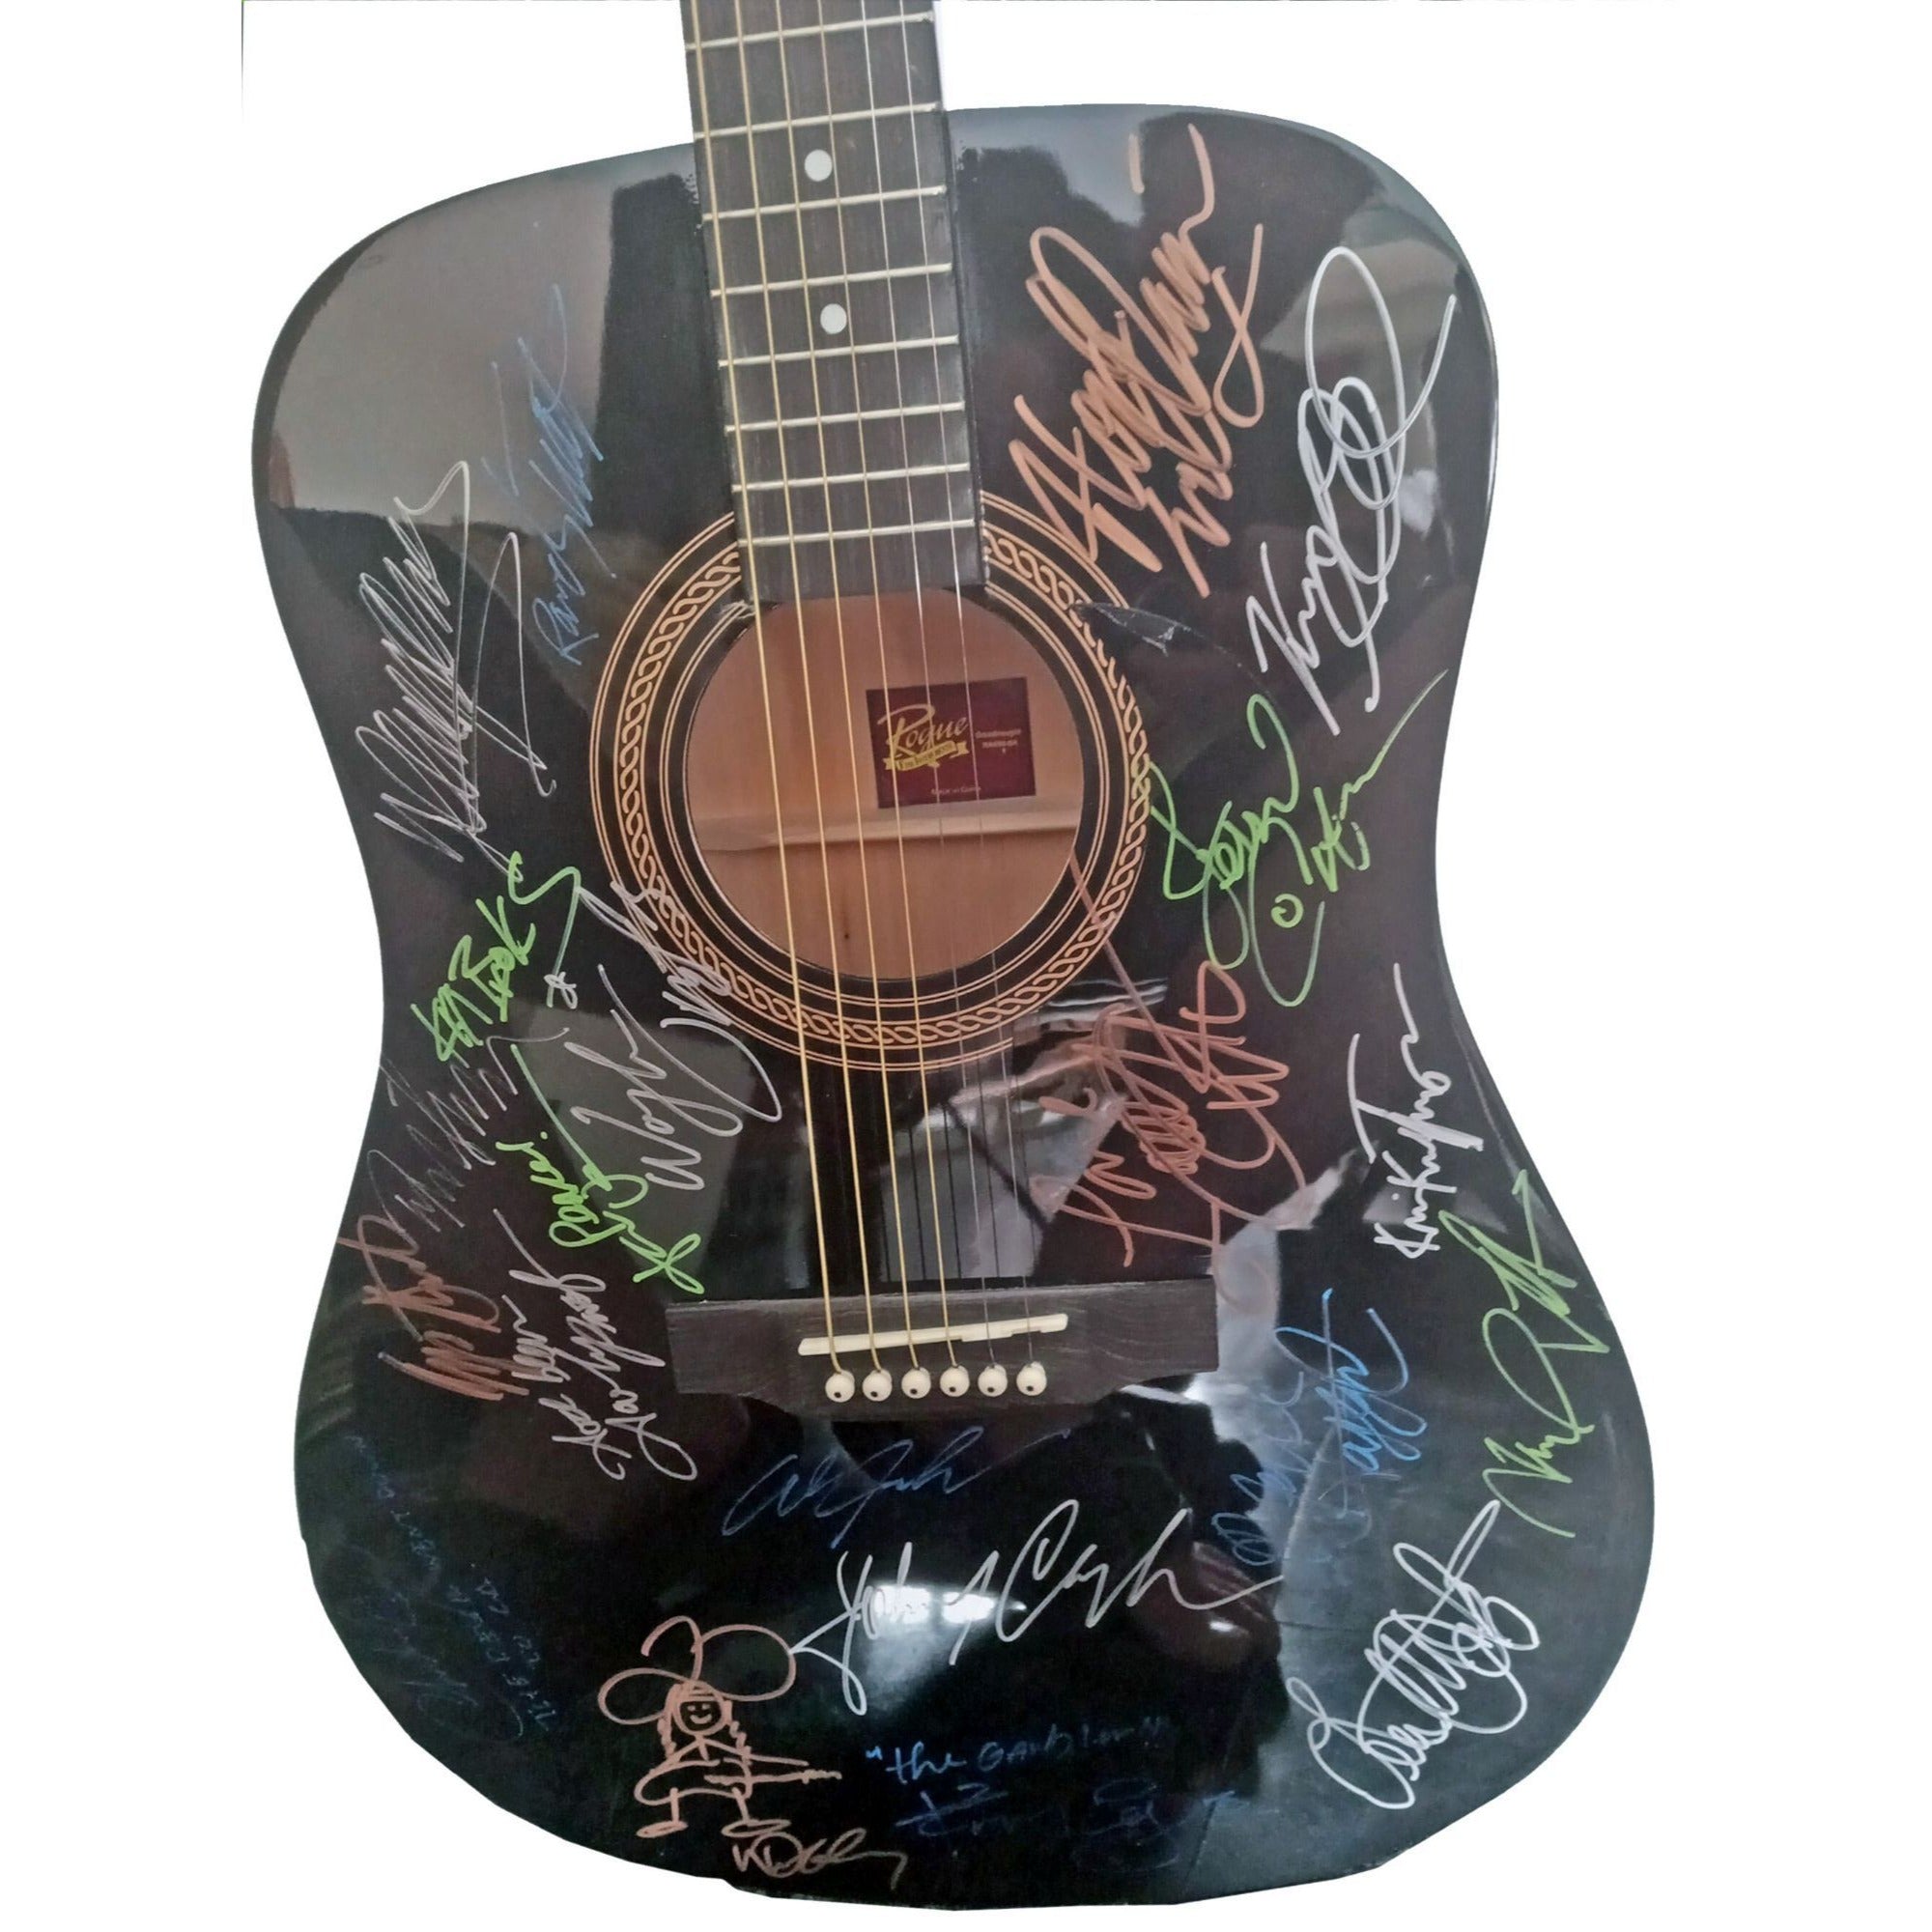 Charlie Daniels, Johnny Cash, Willie Nelson, Kenny Rogers, Waylon Jennings country legends framed guitar signed with proof